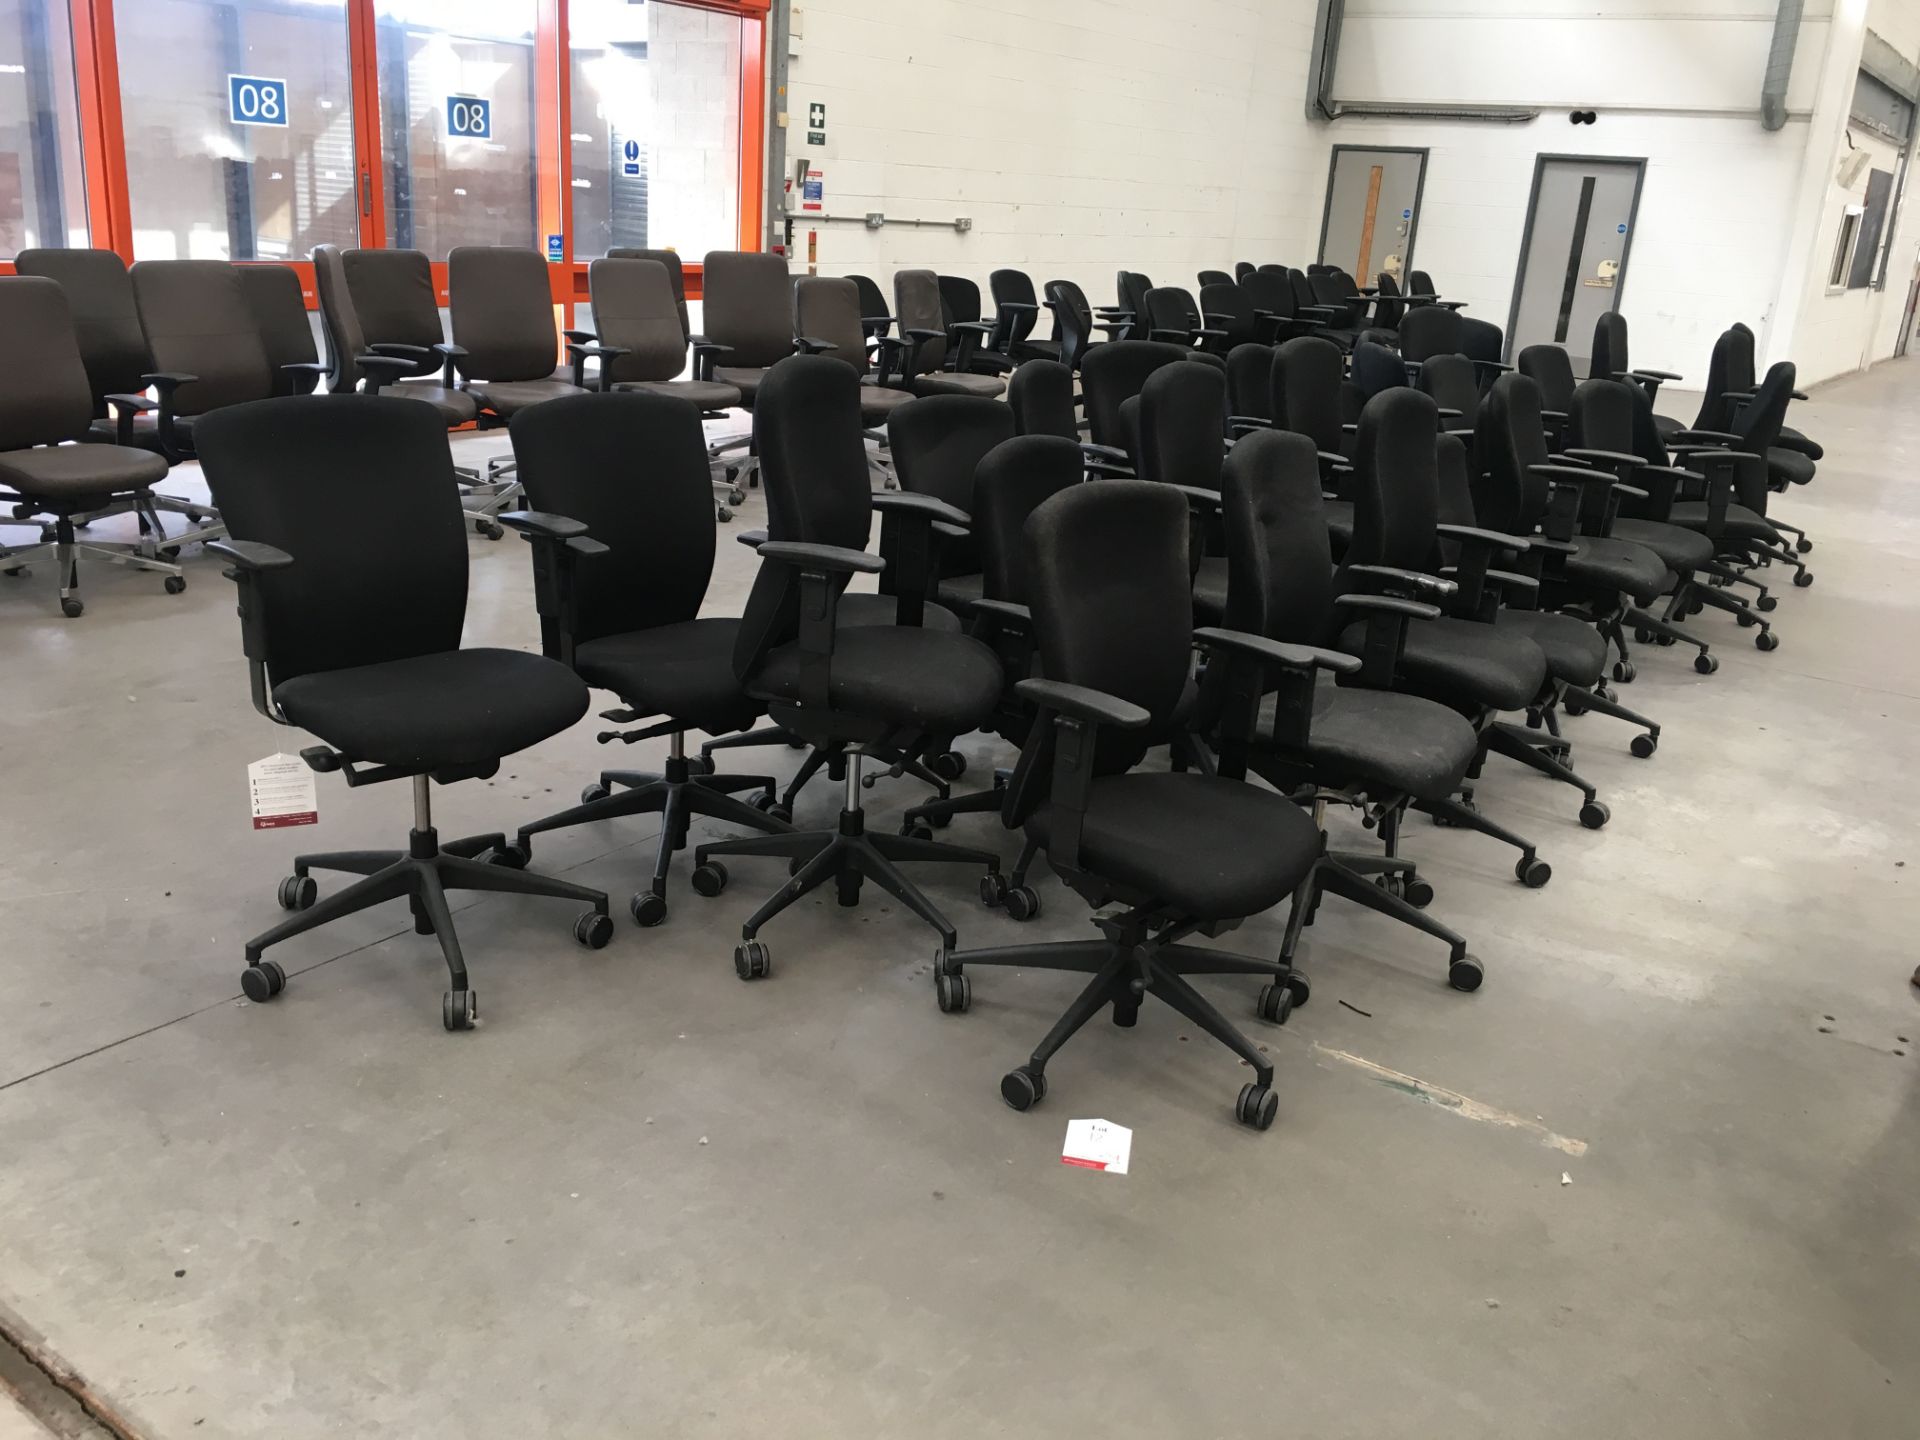 34 x Height adjustable typist chairs with arms